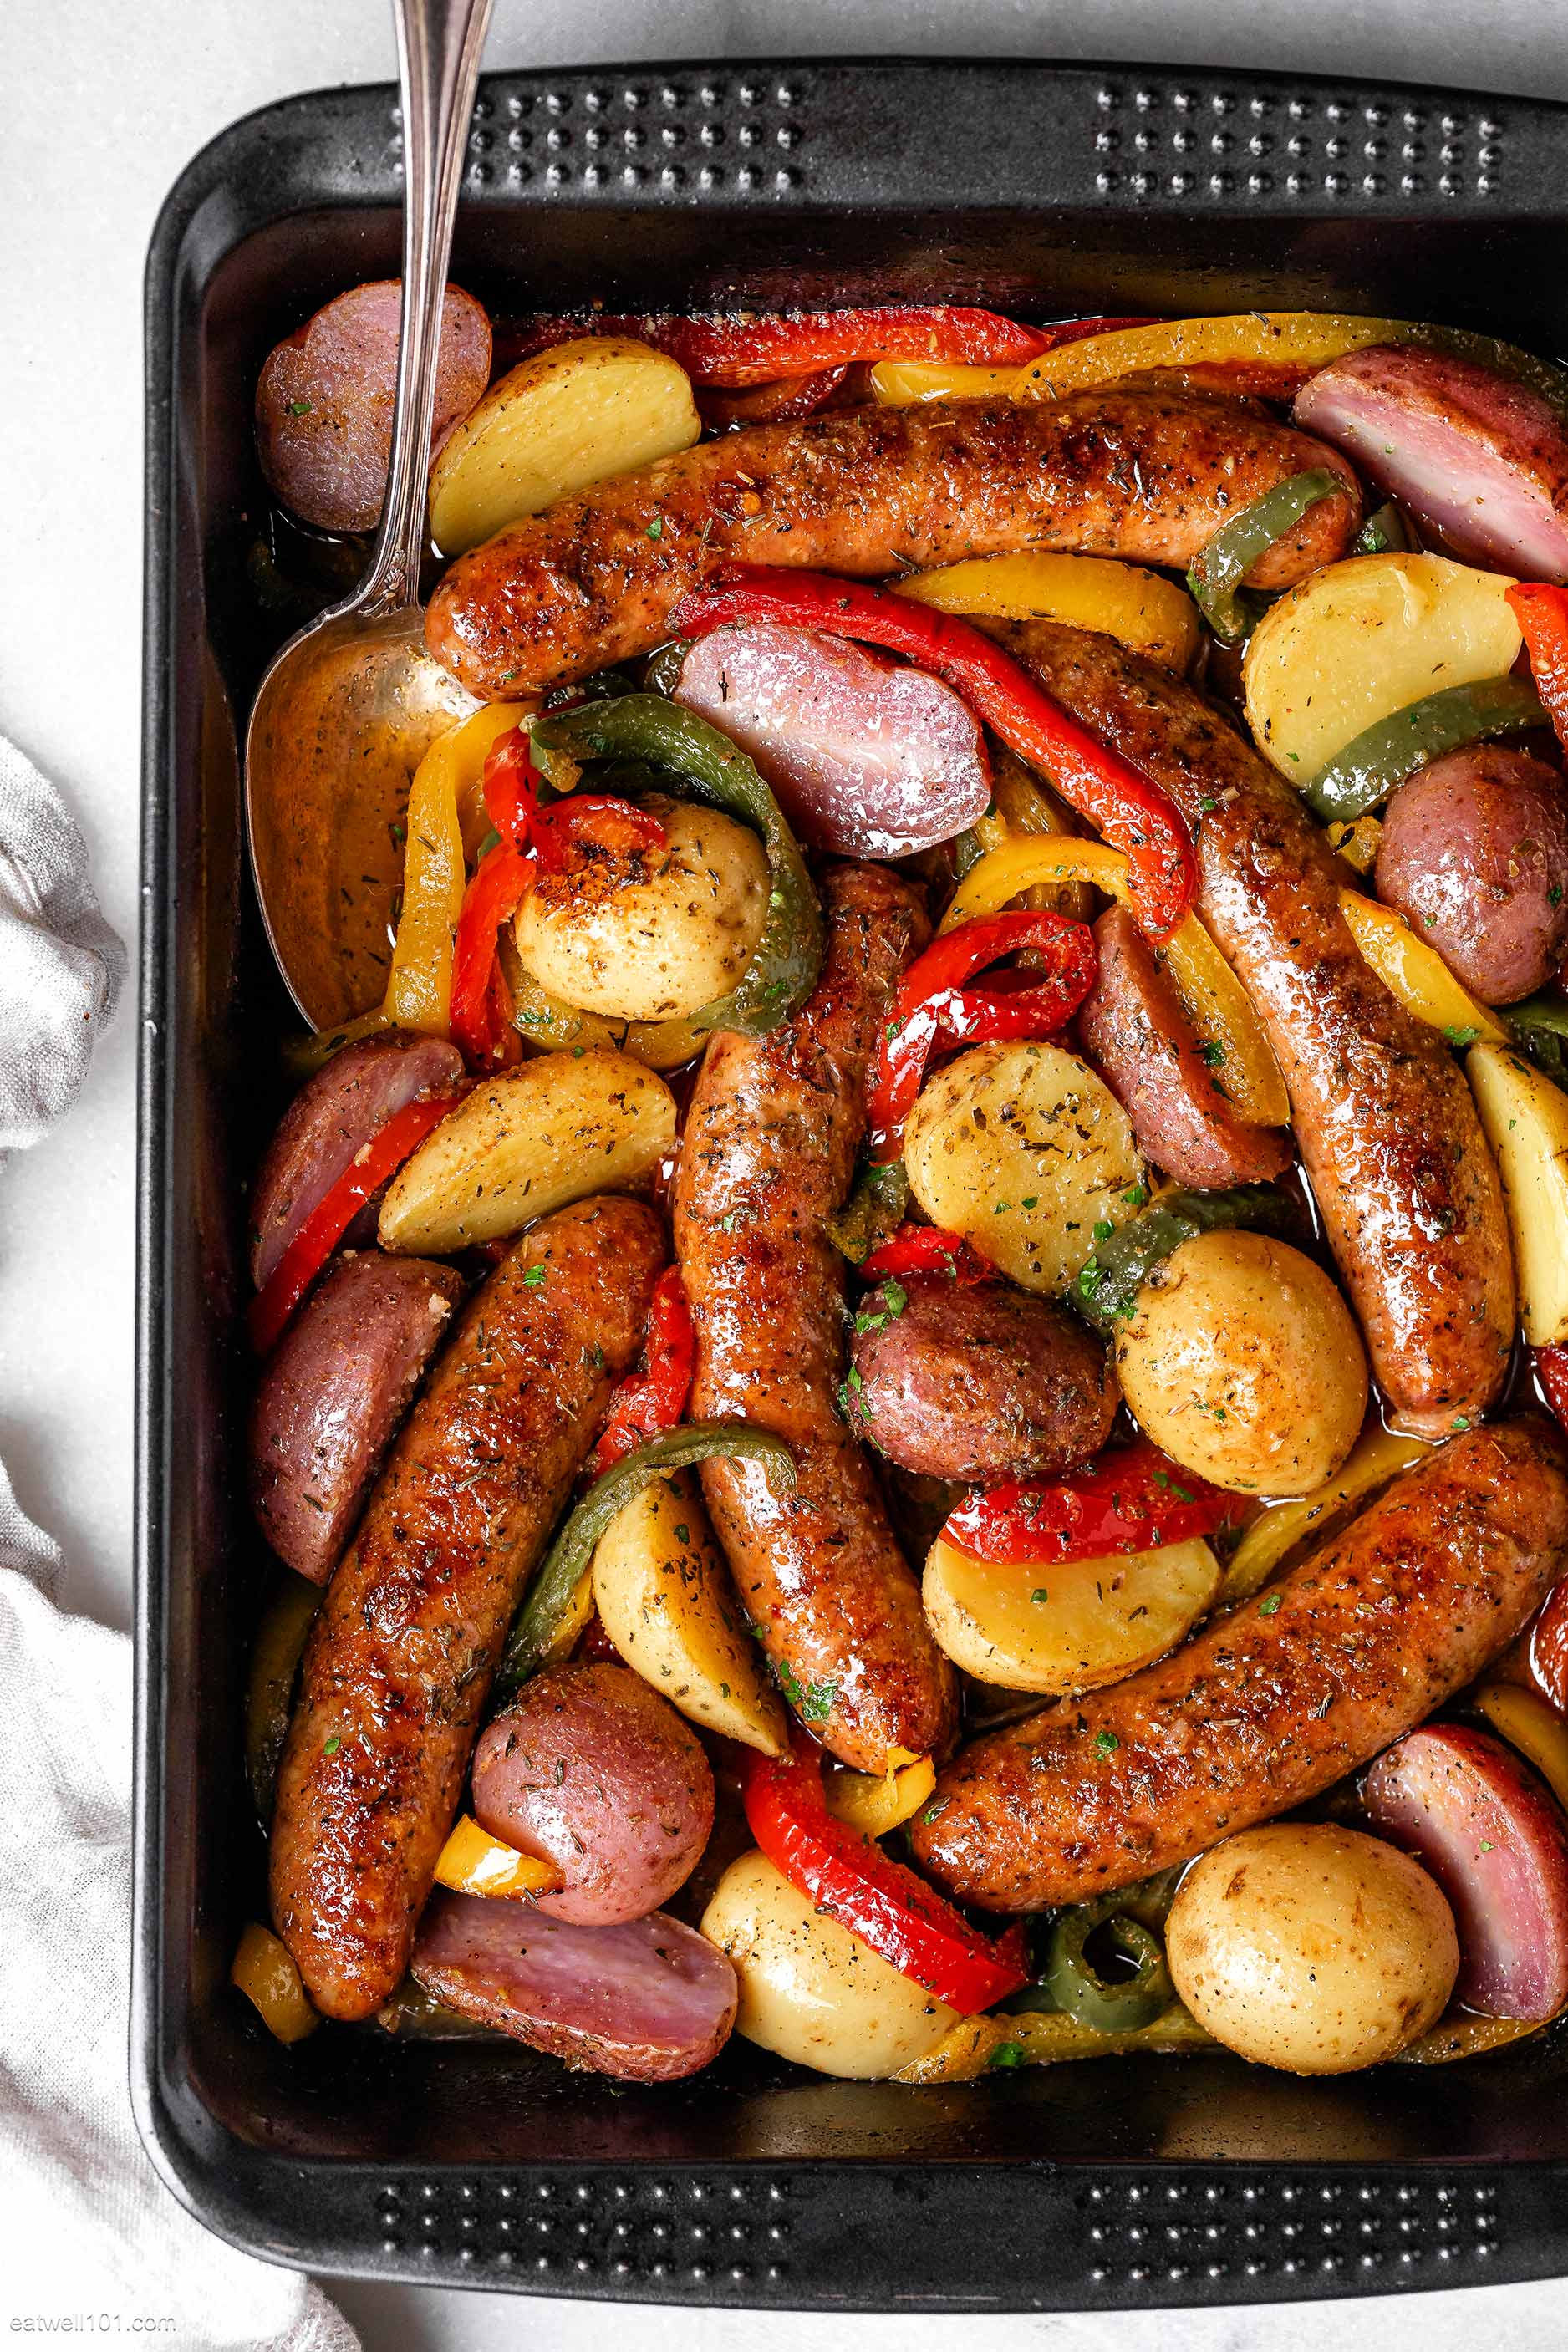 Sheet Pan Sausage and Potatoes - The Healthy Epicurean